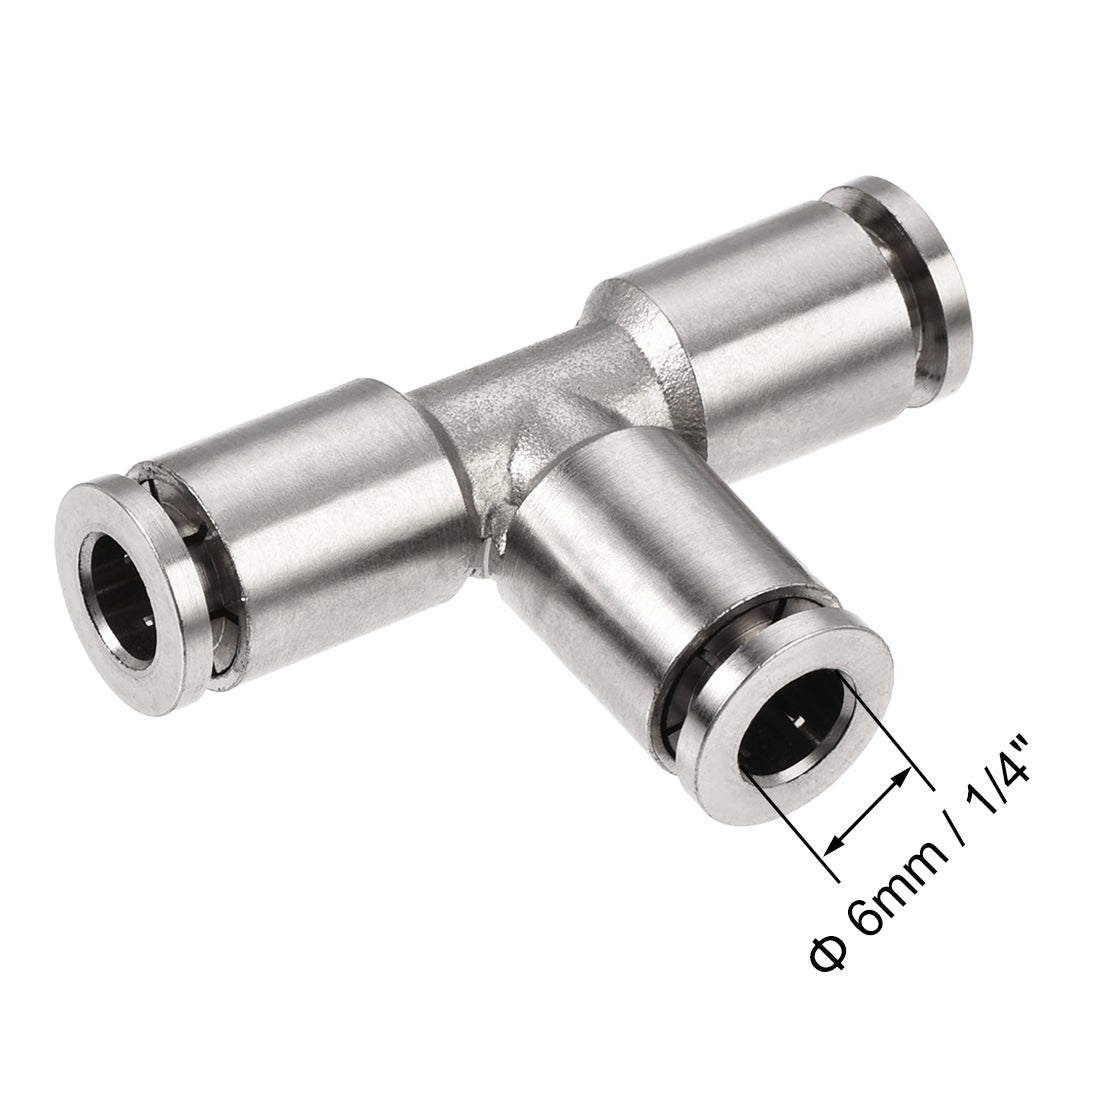 uxcell Uxcell Tee Push to Connect Tube Fittings 6mm OD Push Lock Nickel Plated Copper 2Pcs